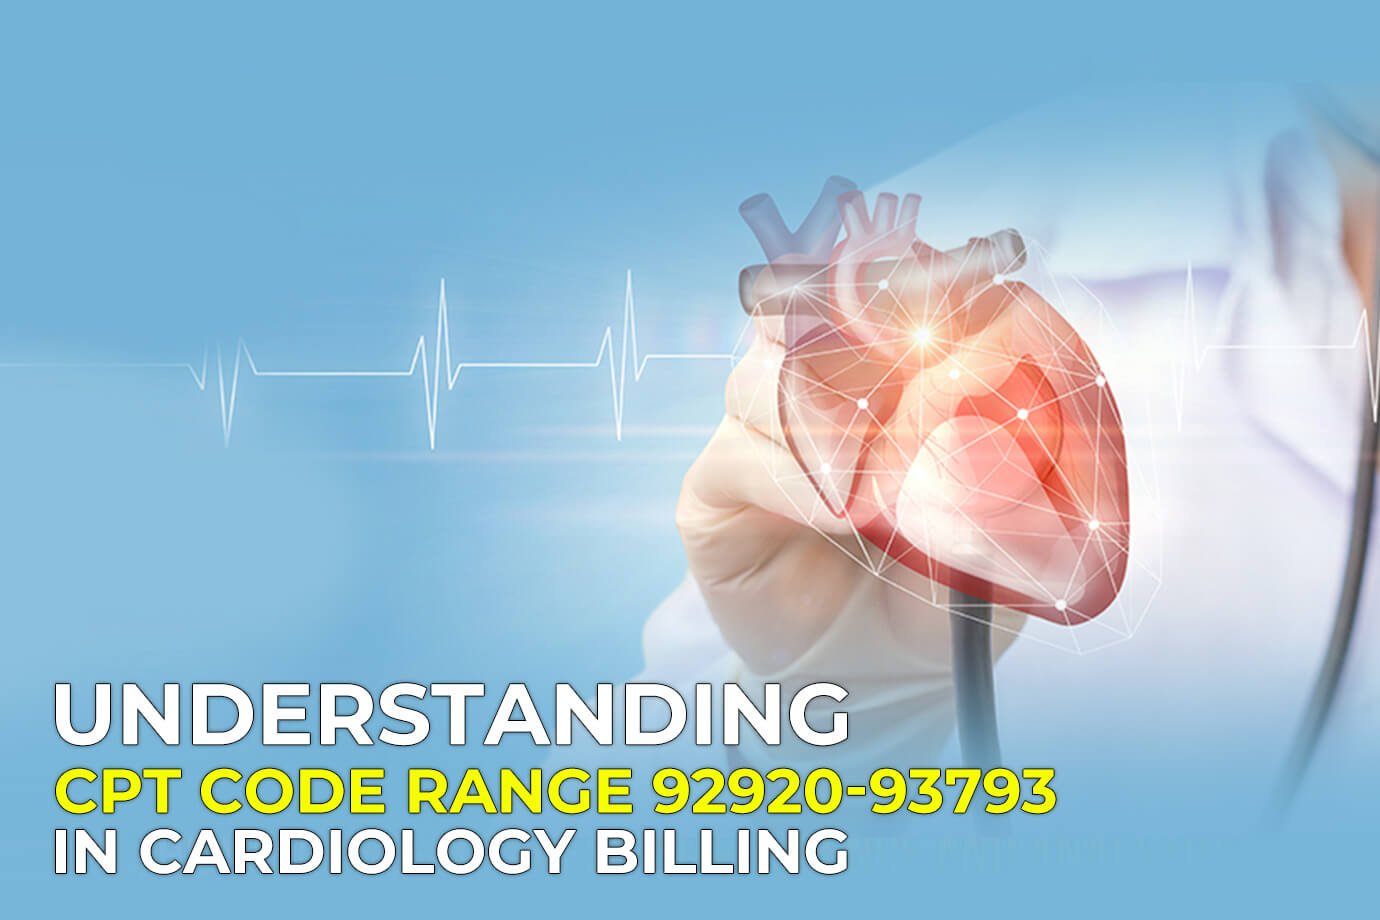 Illustration of a document titled 'Understanding CPT Code Range 92920-93793 In Cardiology Billing